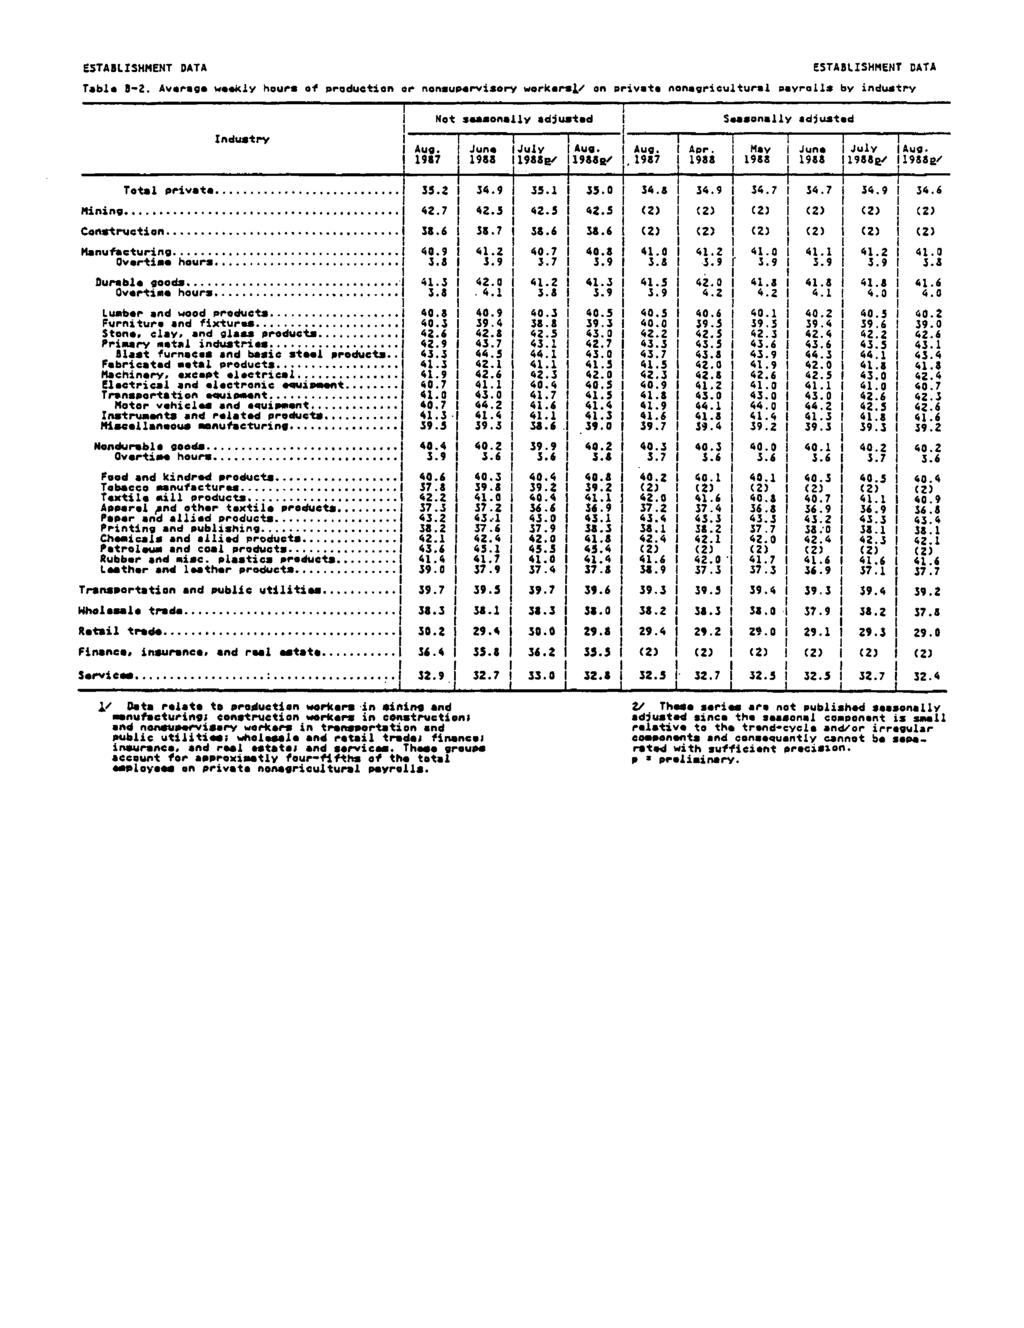 ESTABLSHMENT DATA ESTABLSHMENT DATA Table 8-2. Average weekly hours of production or nonsupervisory worker*!/ on private nonagricultural payrolls by industry Mining Construction Total private.